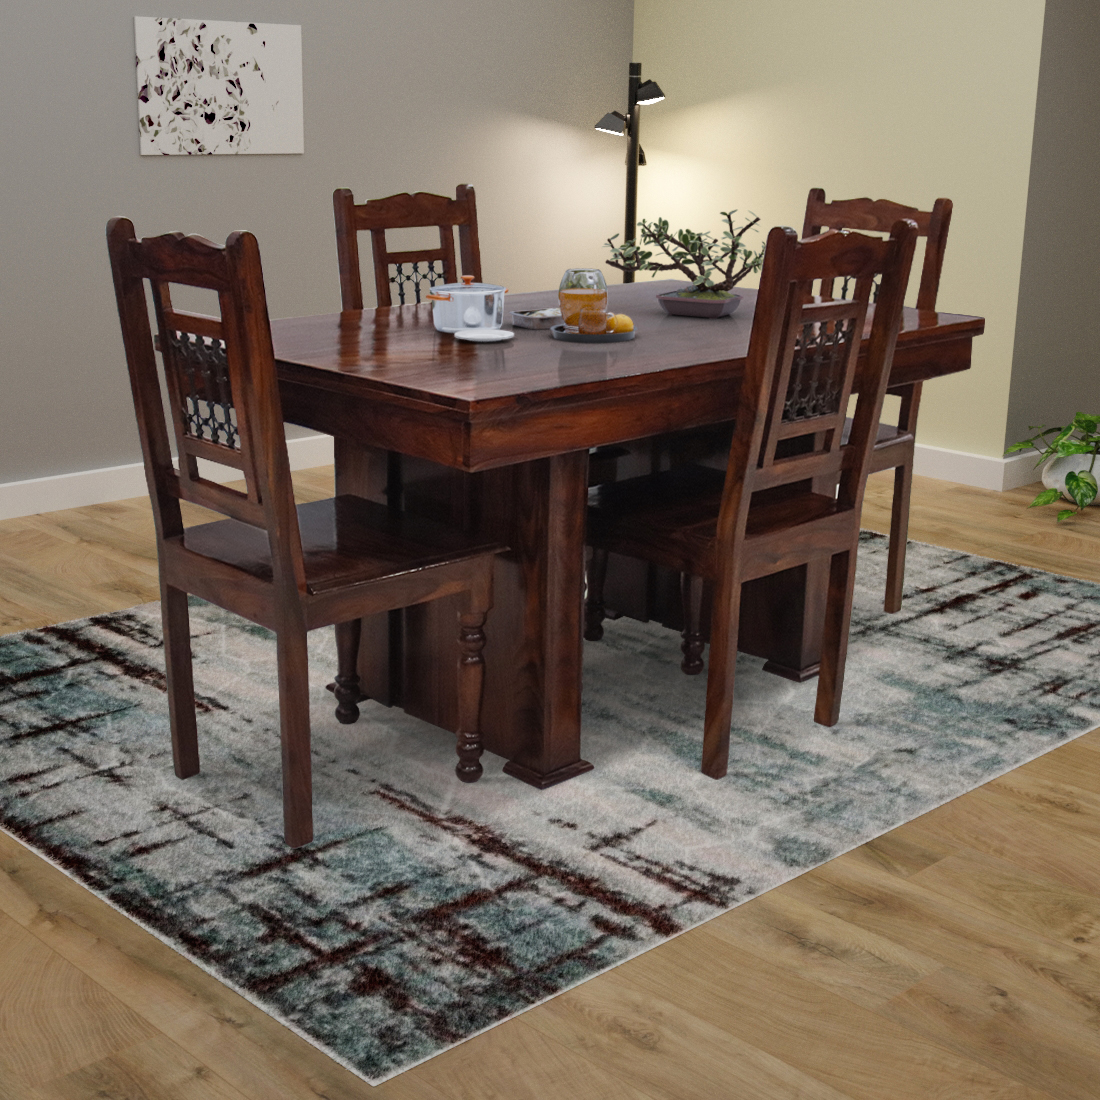 Aaram By Zebrs Furniture Sheesham Wood 6 Seater Dining Table Set with 6 Chairs